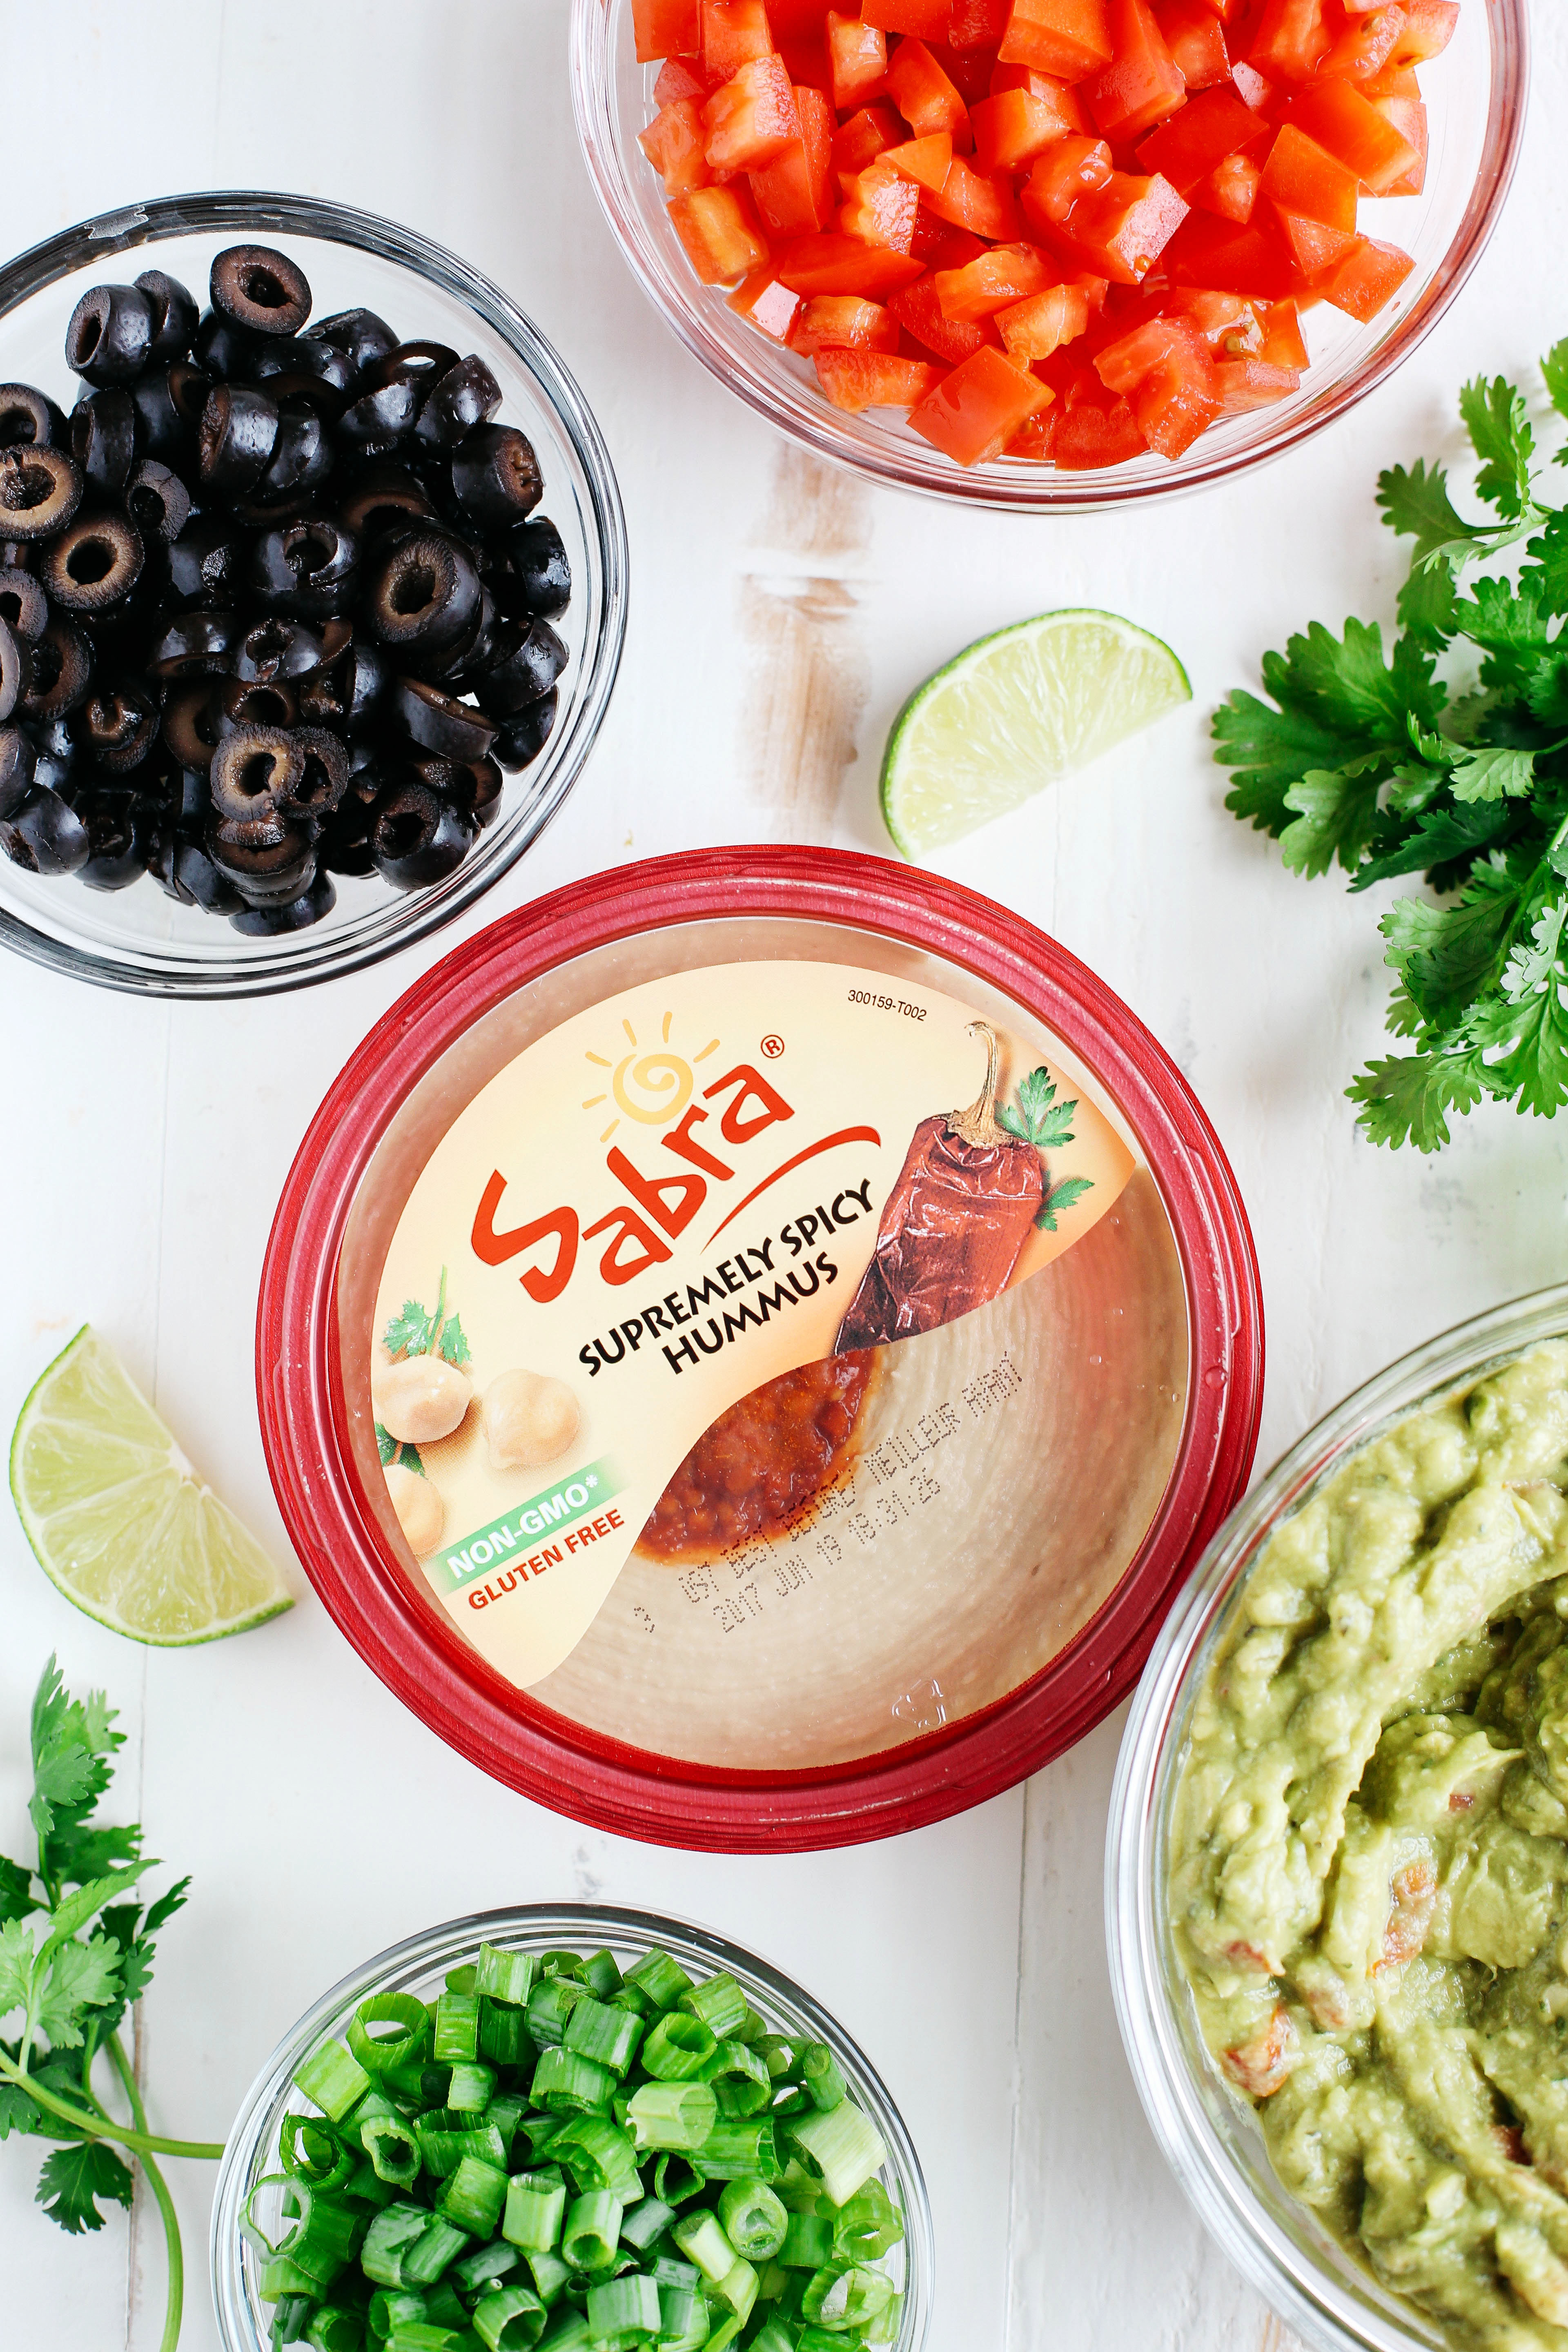 This Healthier 7 Layer Spicy Taco Dip is a lighter take on your favorite party appetizer perfect for any gathering or event that you can enjoy guilt-free!